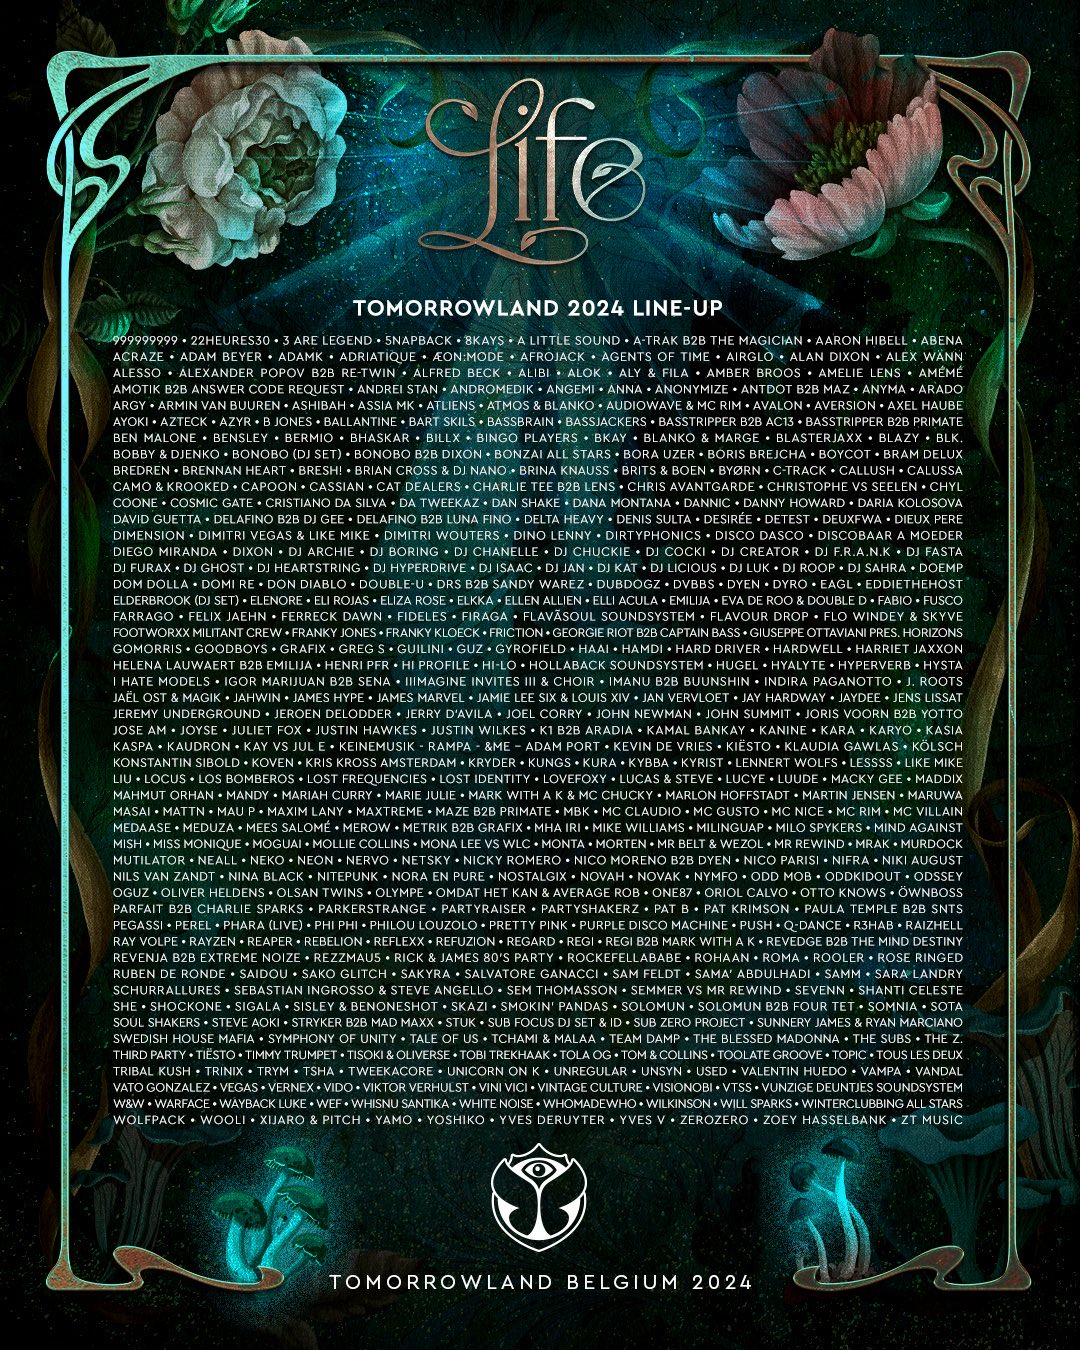 Tomorrowland 2024 Line-up completo